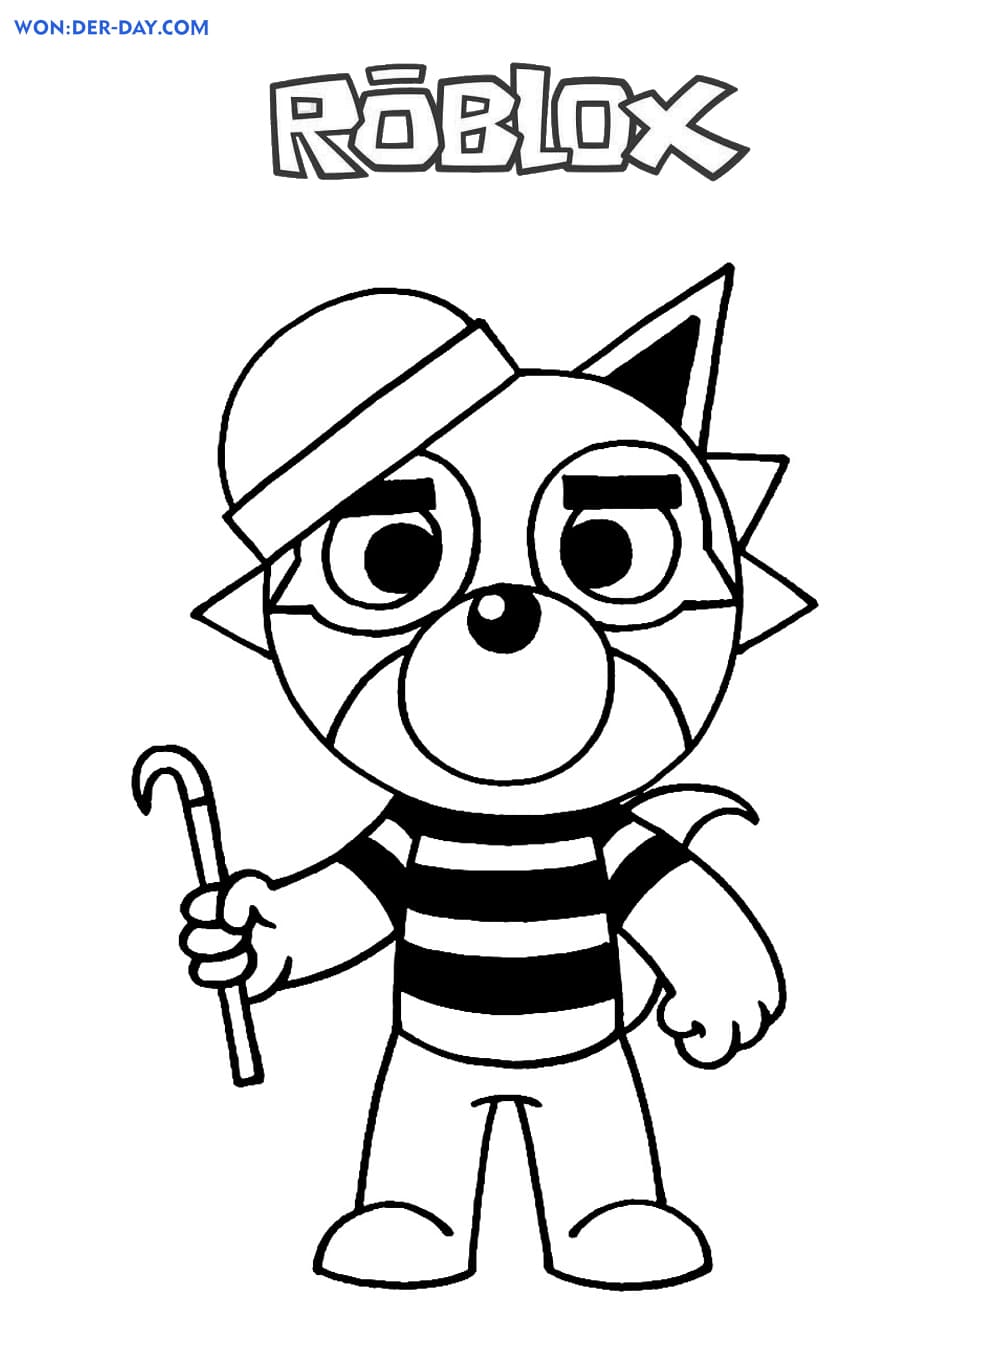 Piggy Roblox Coloring Pages Wonder Day Coloring Pages For Children And Adults - roblox piggy coloring pages for kids